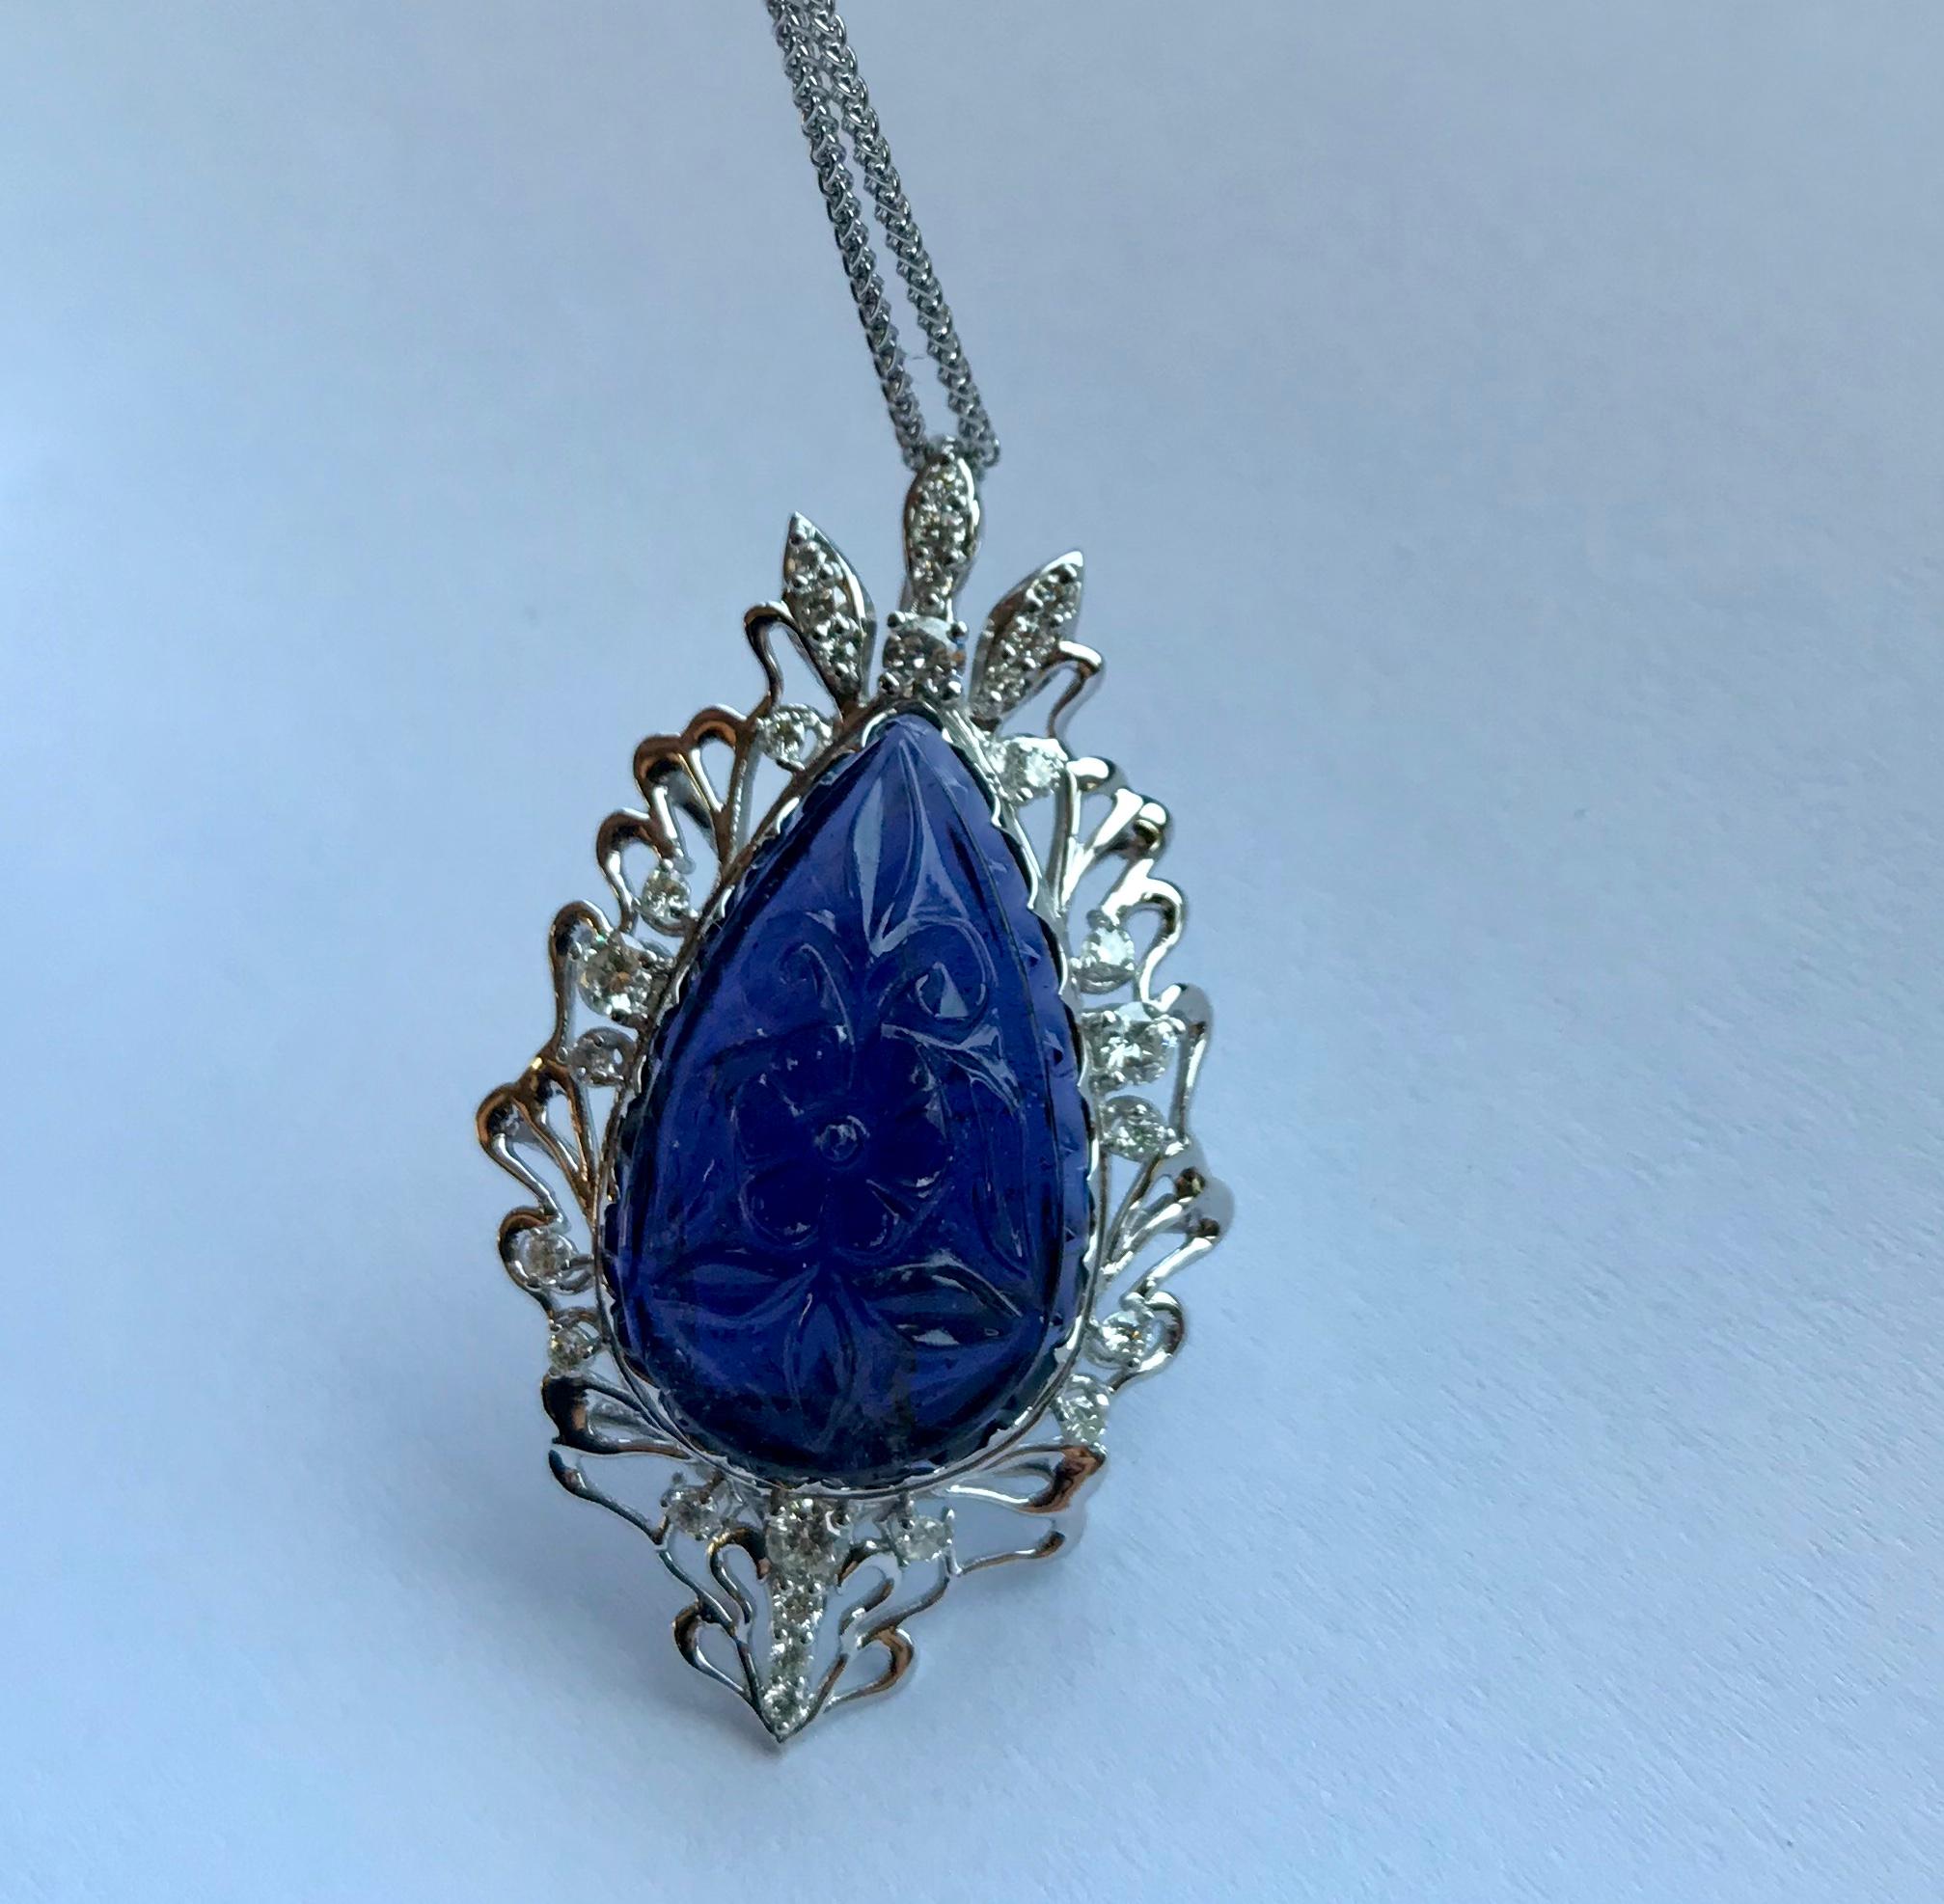 Baroque 11.70 Pear Shaped Carved Natural Iolite and White Diamond Pendant 14K White Gold